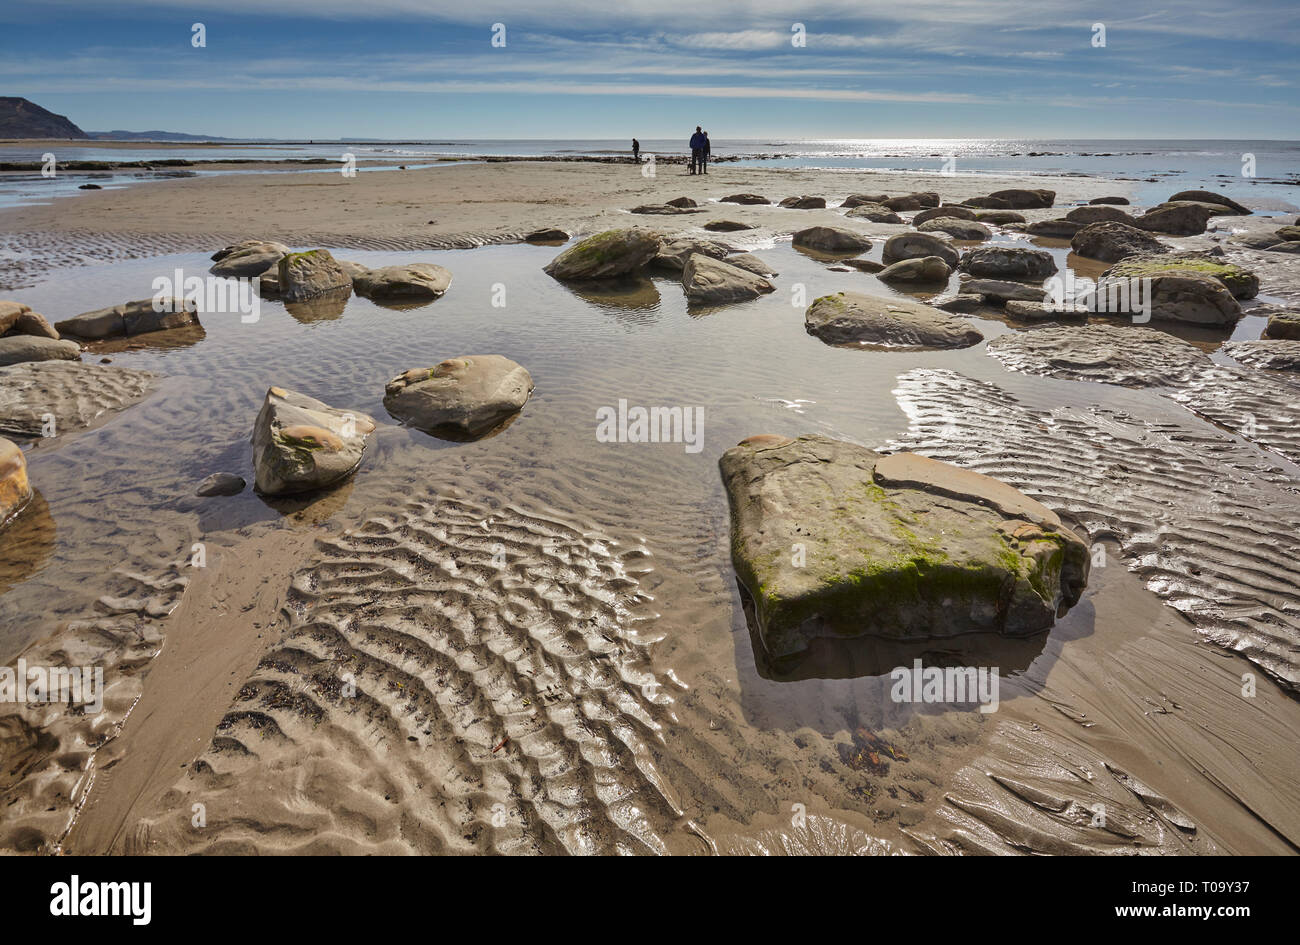 A beach at low tide, with wet sand and reflections; at Charmouth, in the Jurassic Coast World Heritage Site, Dorset, Great Britain. Stock Photo